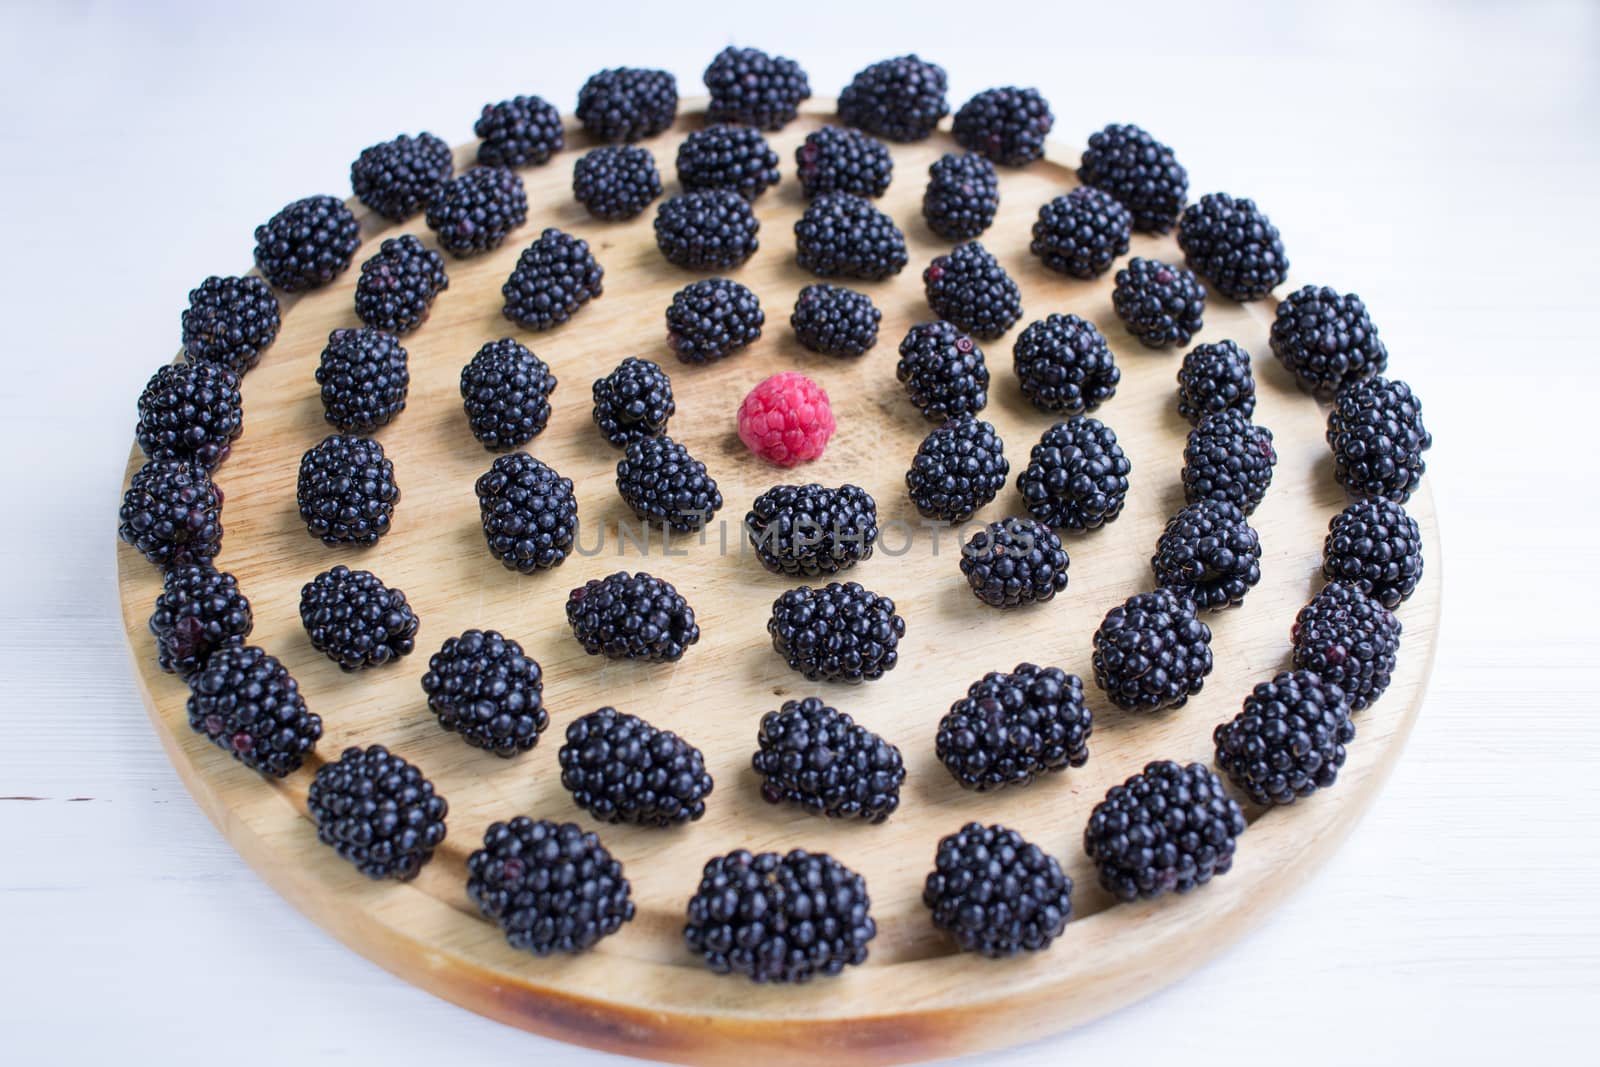 Round set of many blackberries and raspberry on wooden tray by VeraVerano